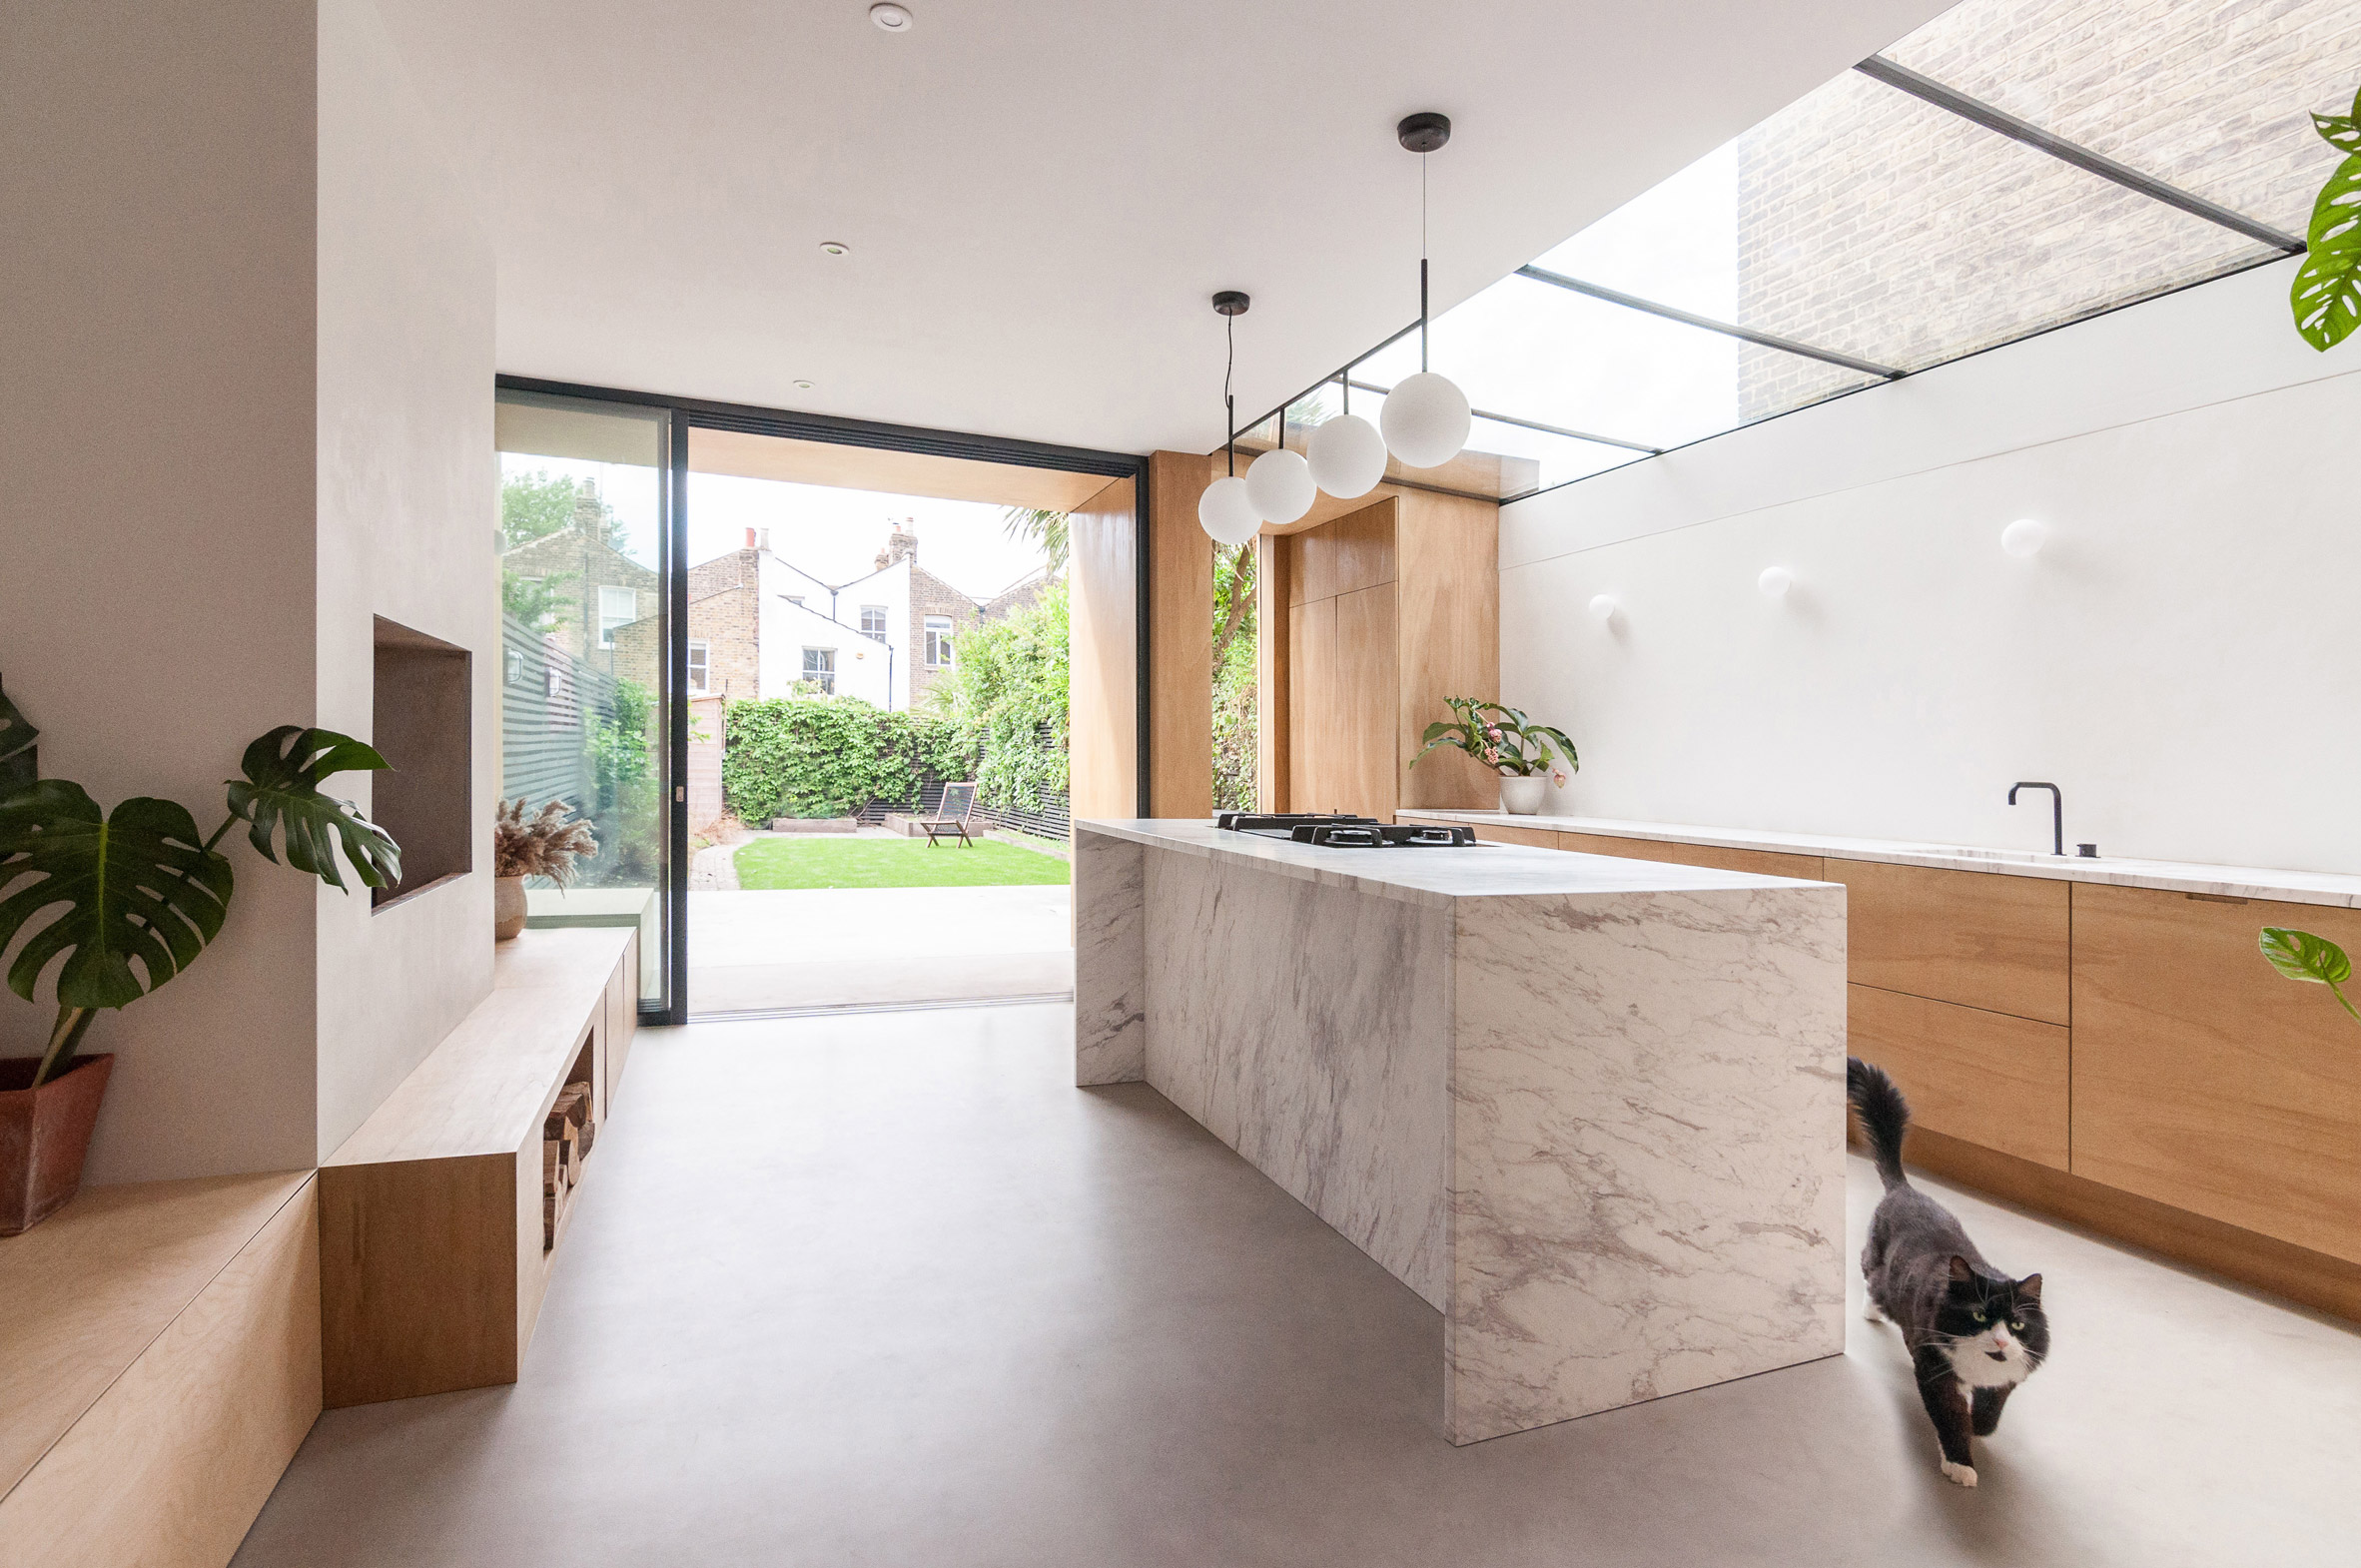 A kitchen with a marble island and wooden cabinetry